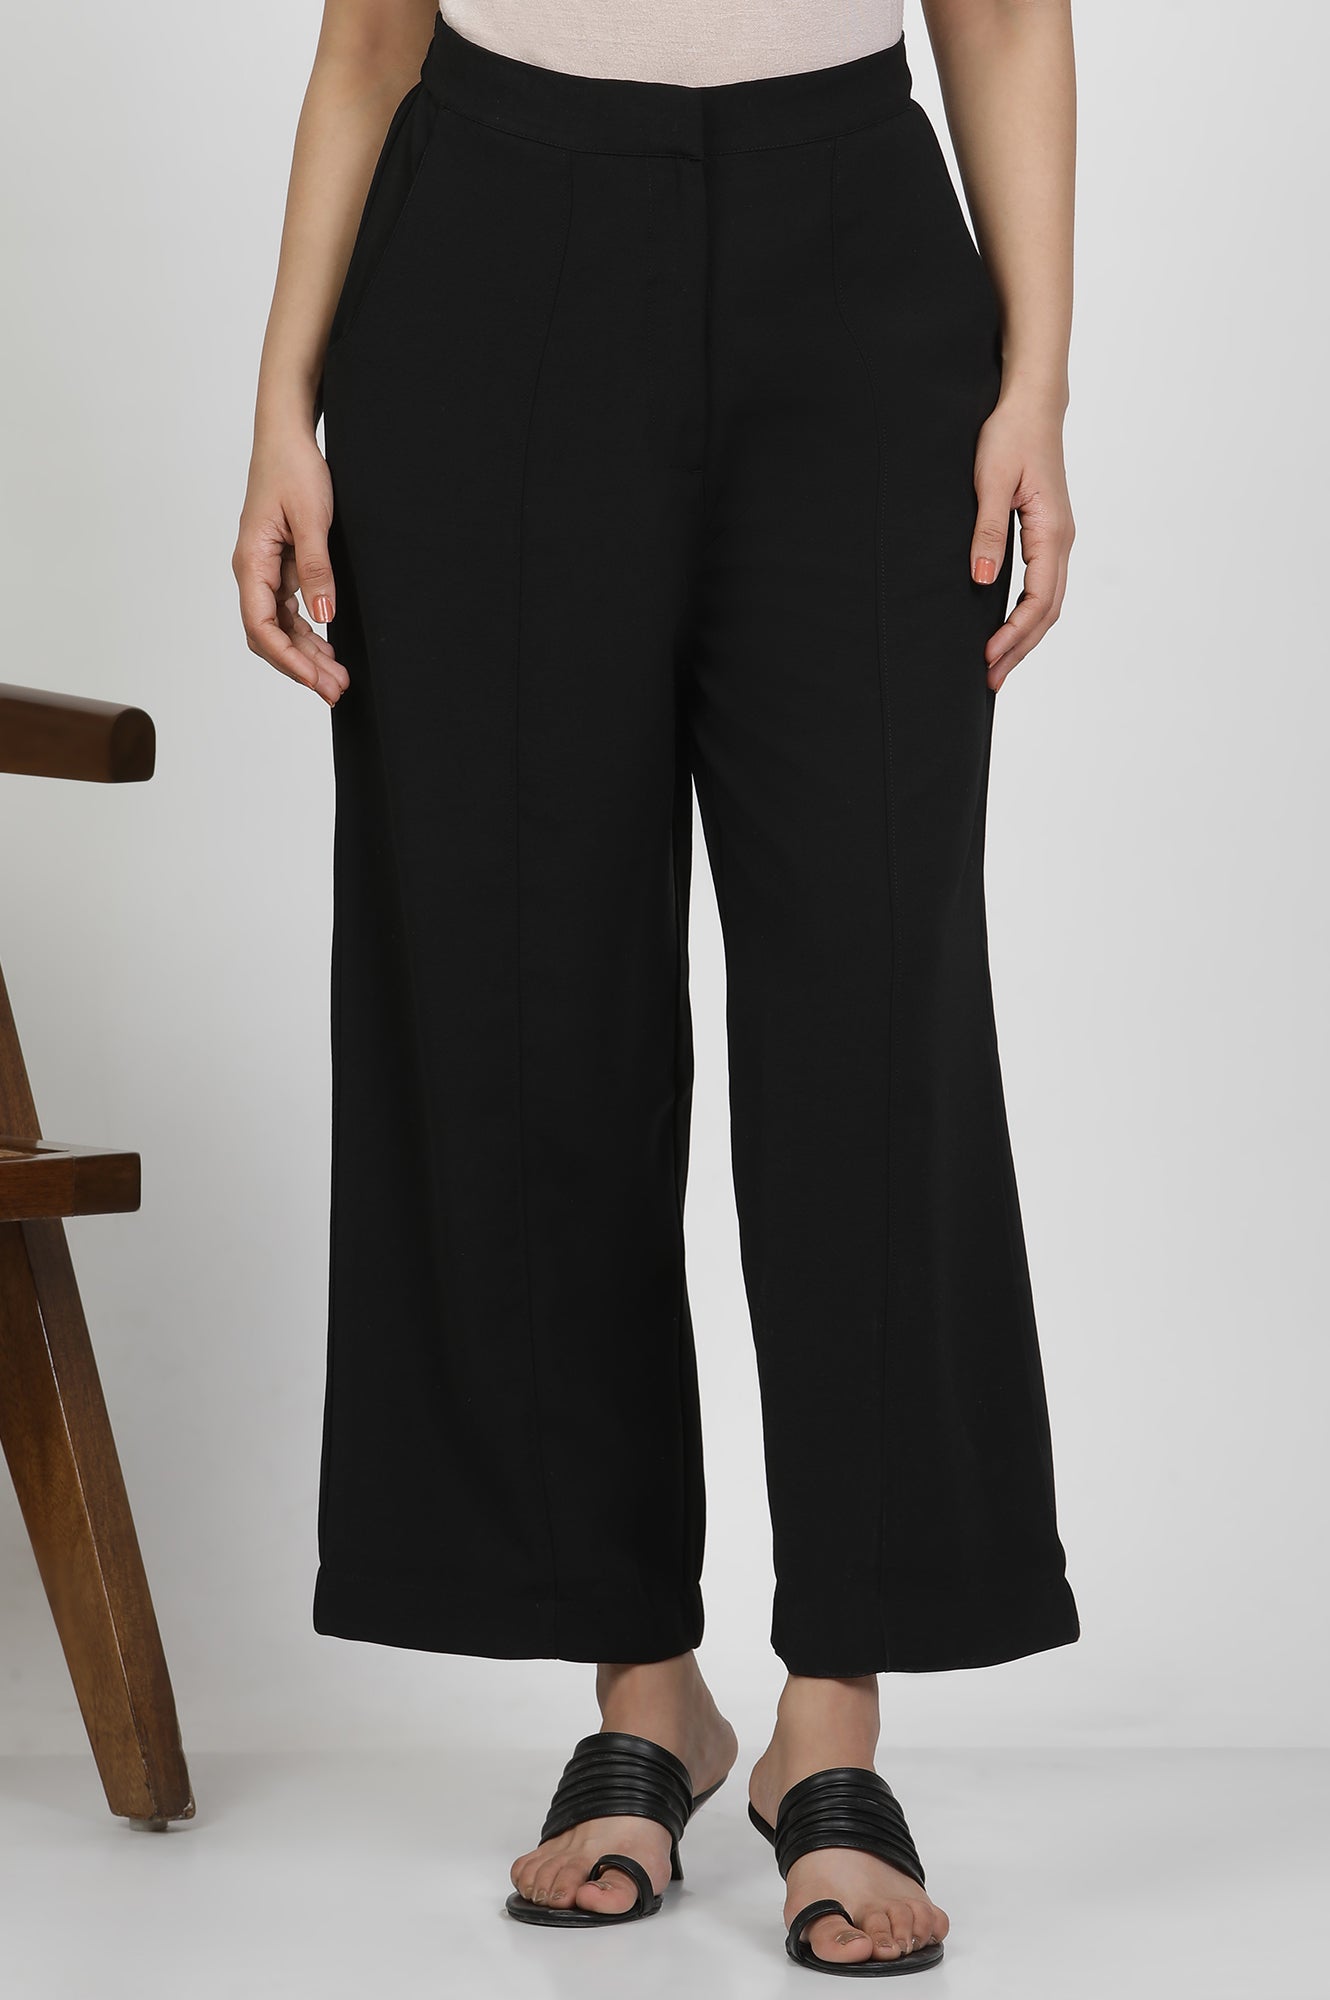 Black Straight Trouser With Front Pintuck